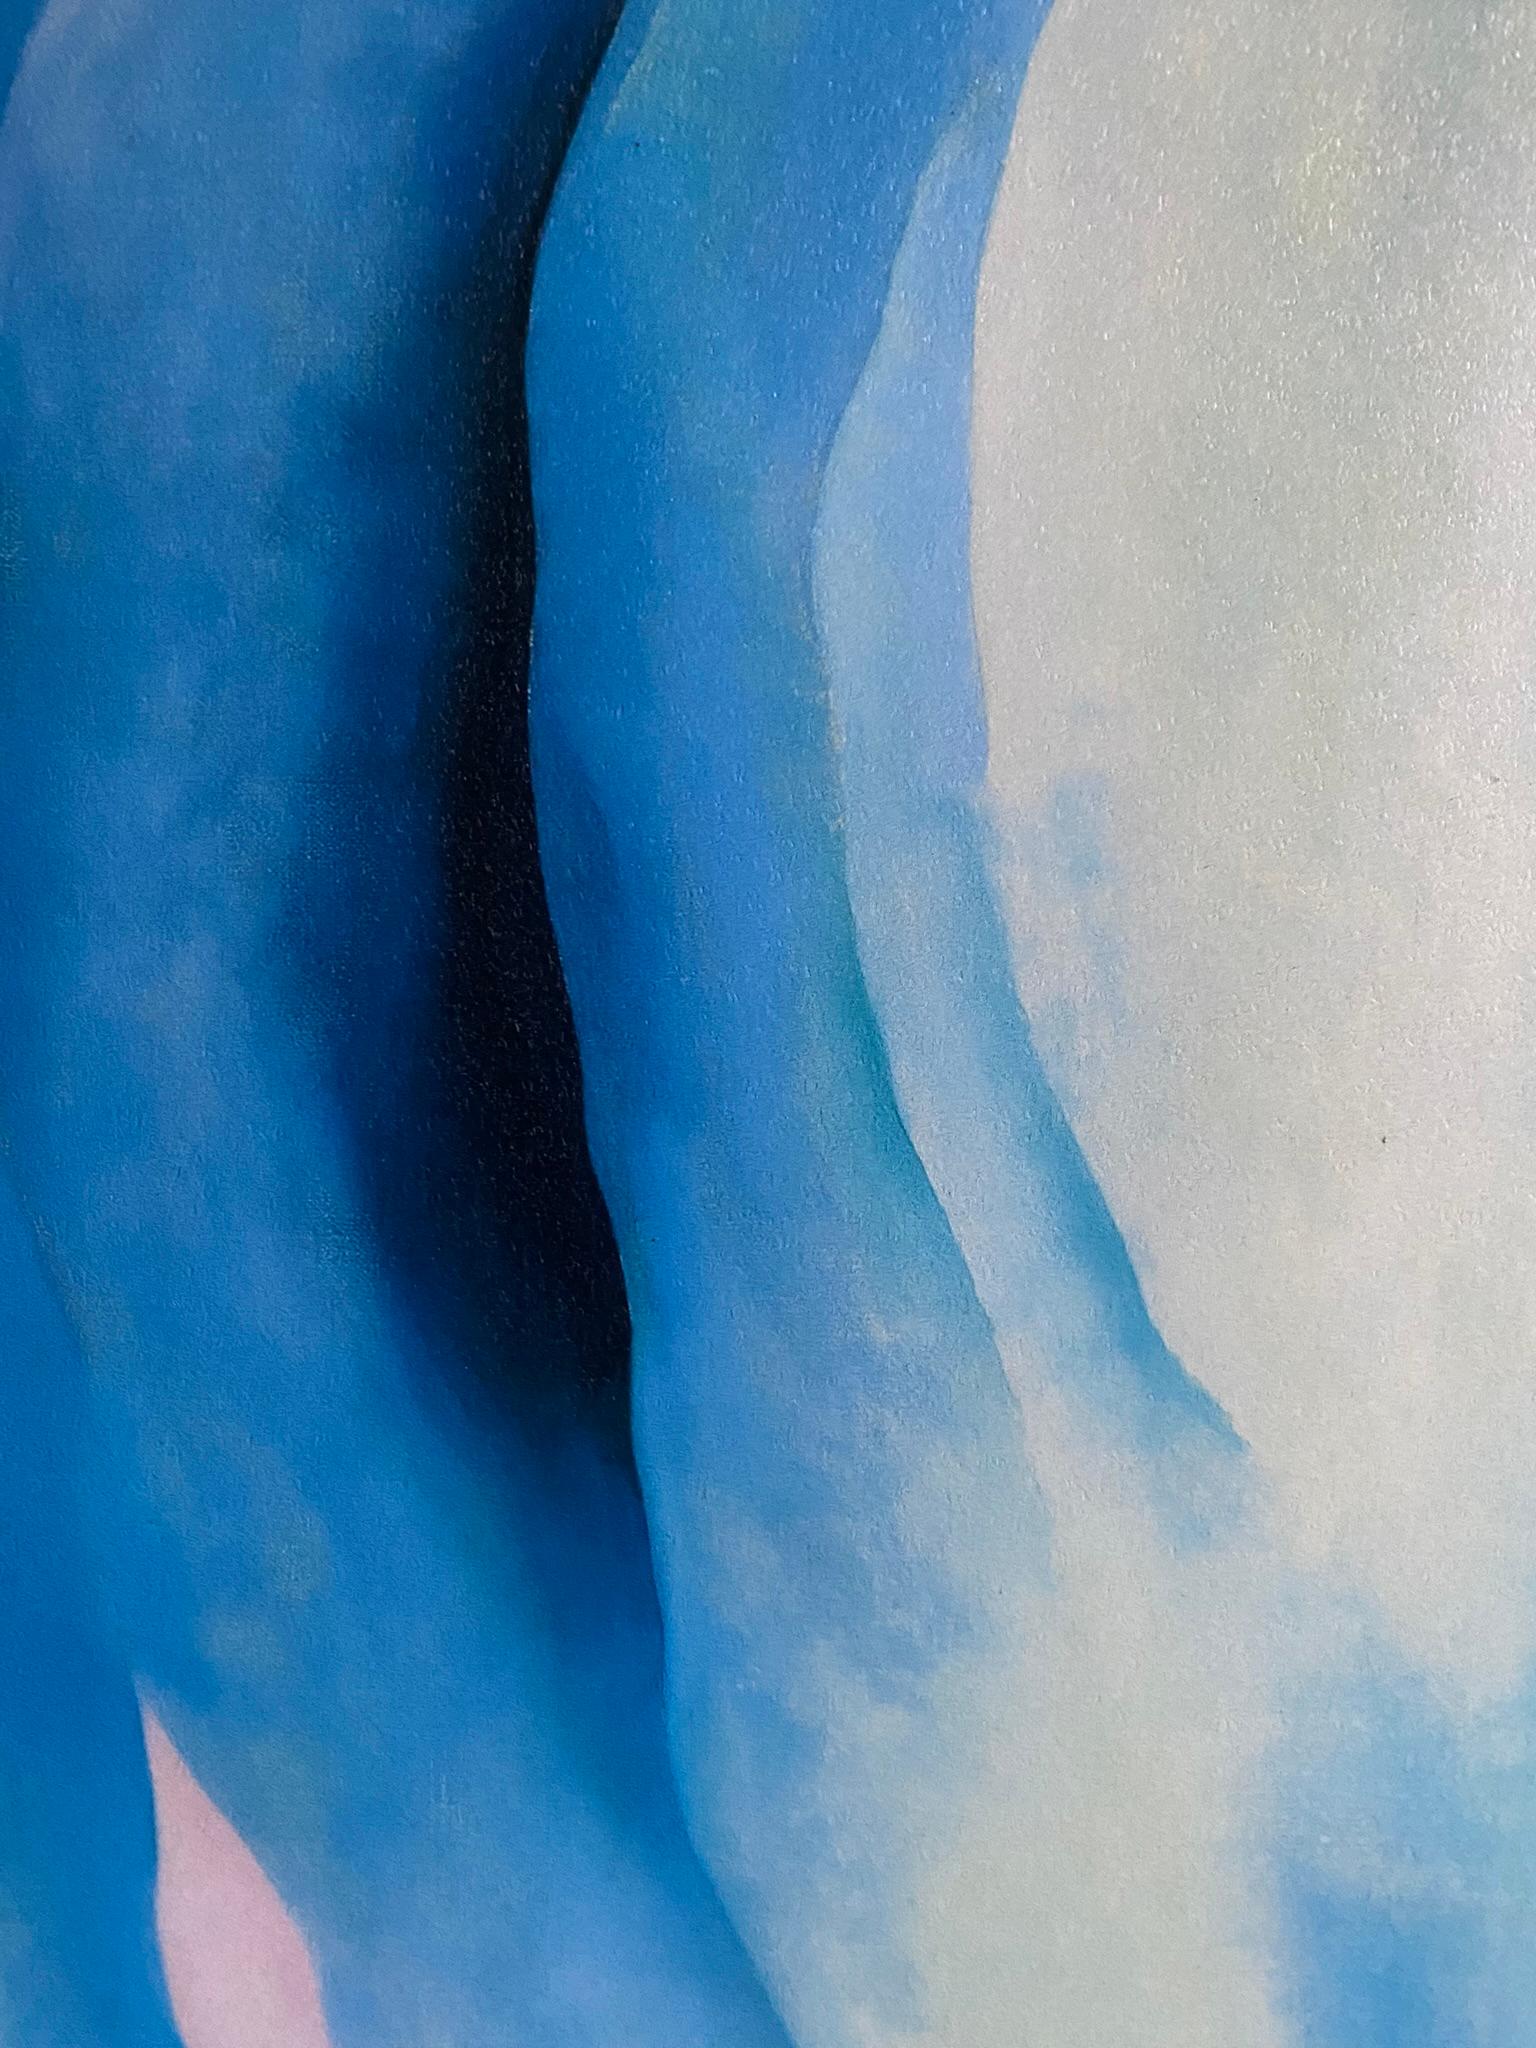 Georgia O'Keeffe-High Quality print by MoMA circa1997-Abstraction Blue-GSYStudio For Sale 11